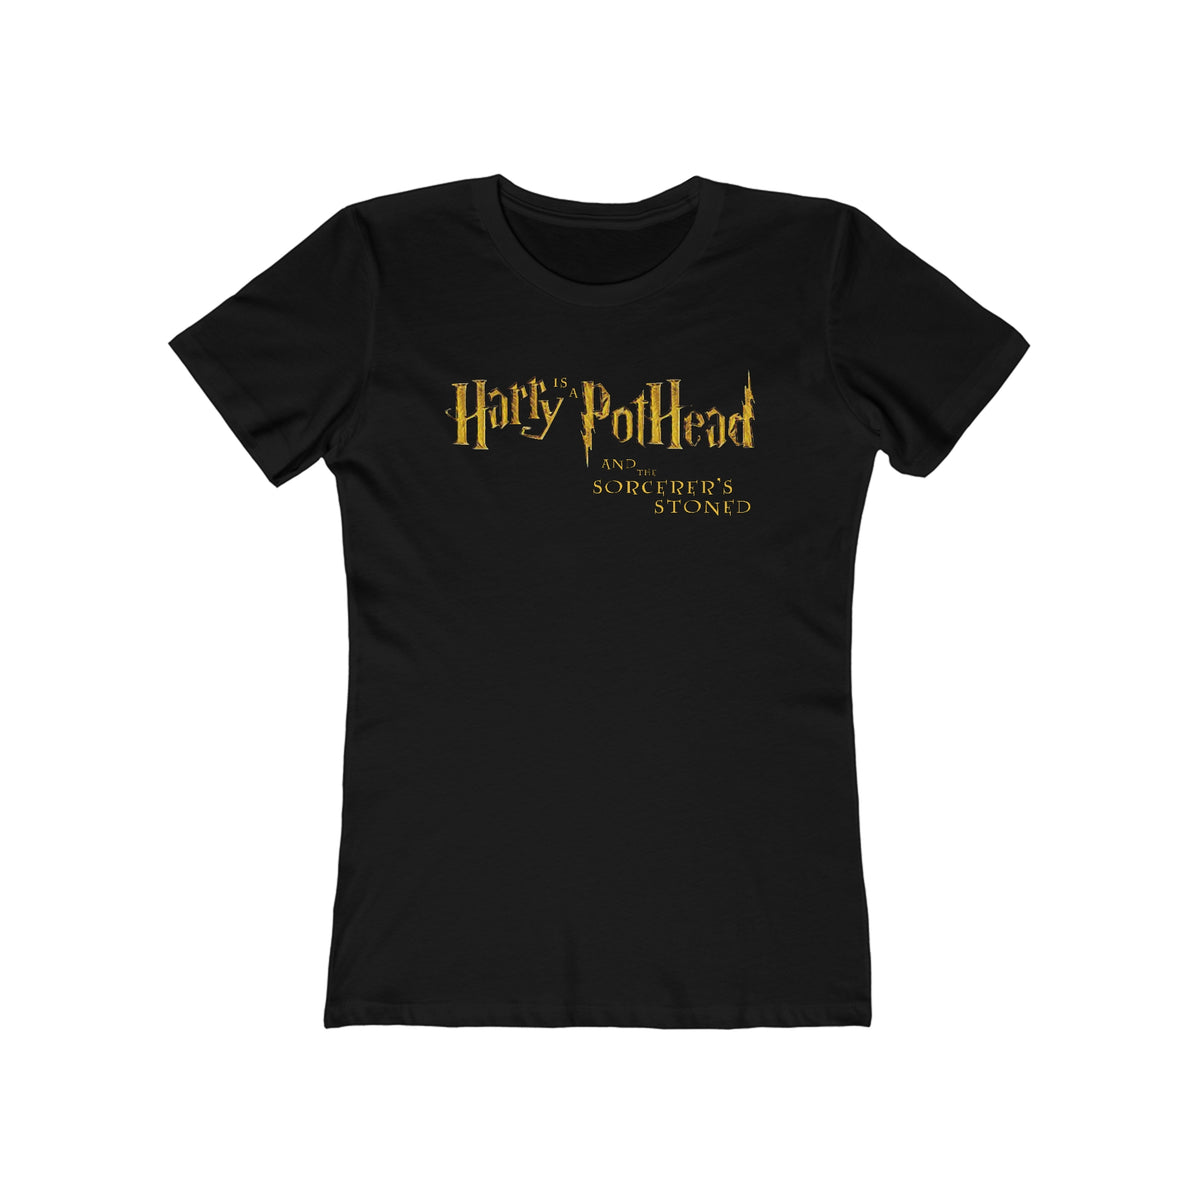 Harry Is A Pothead And The Sorcerer's Stoned - Women’s T-Shirt